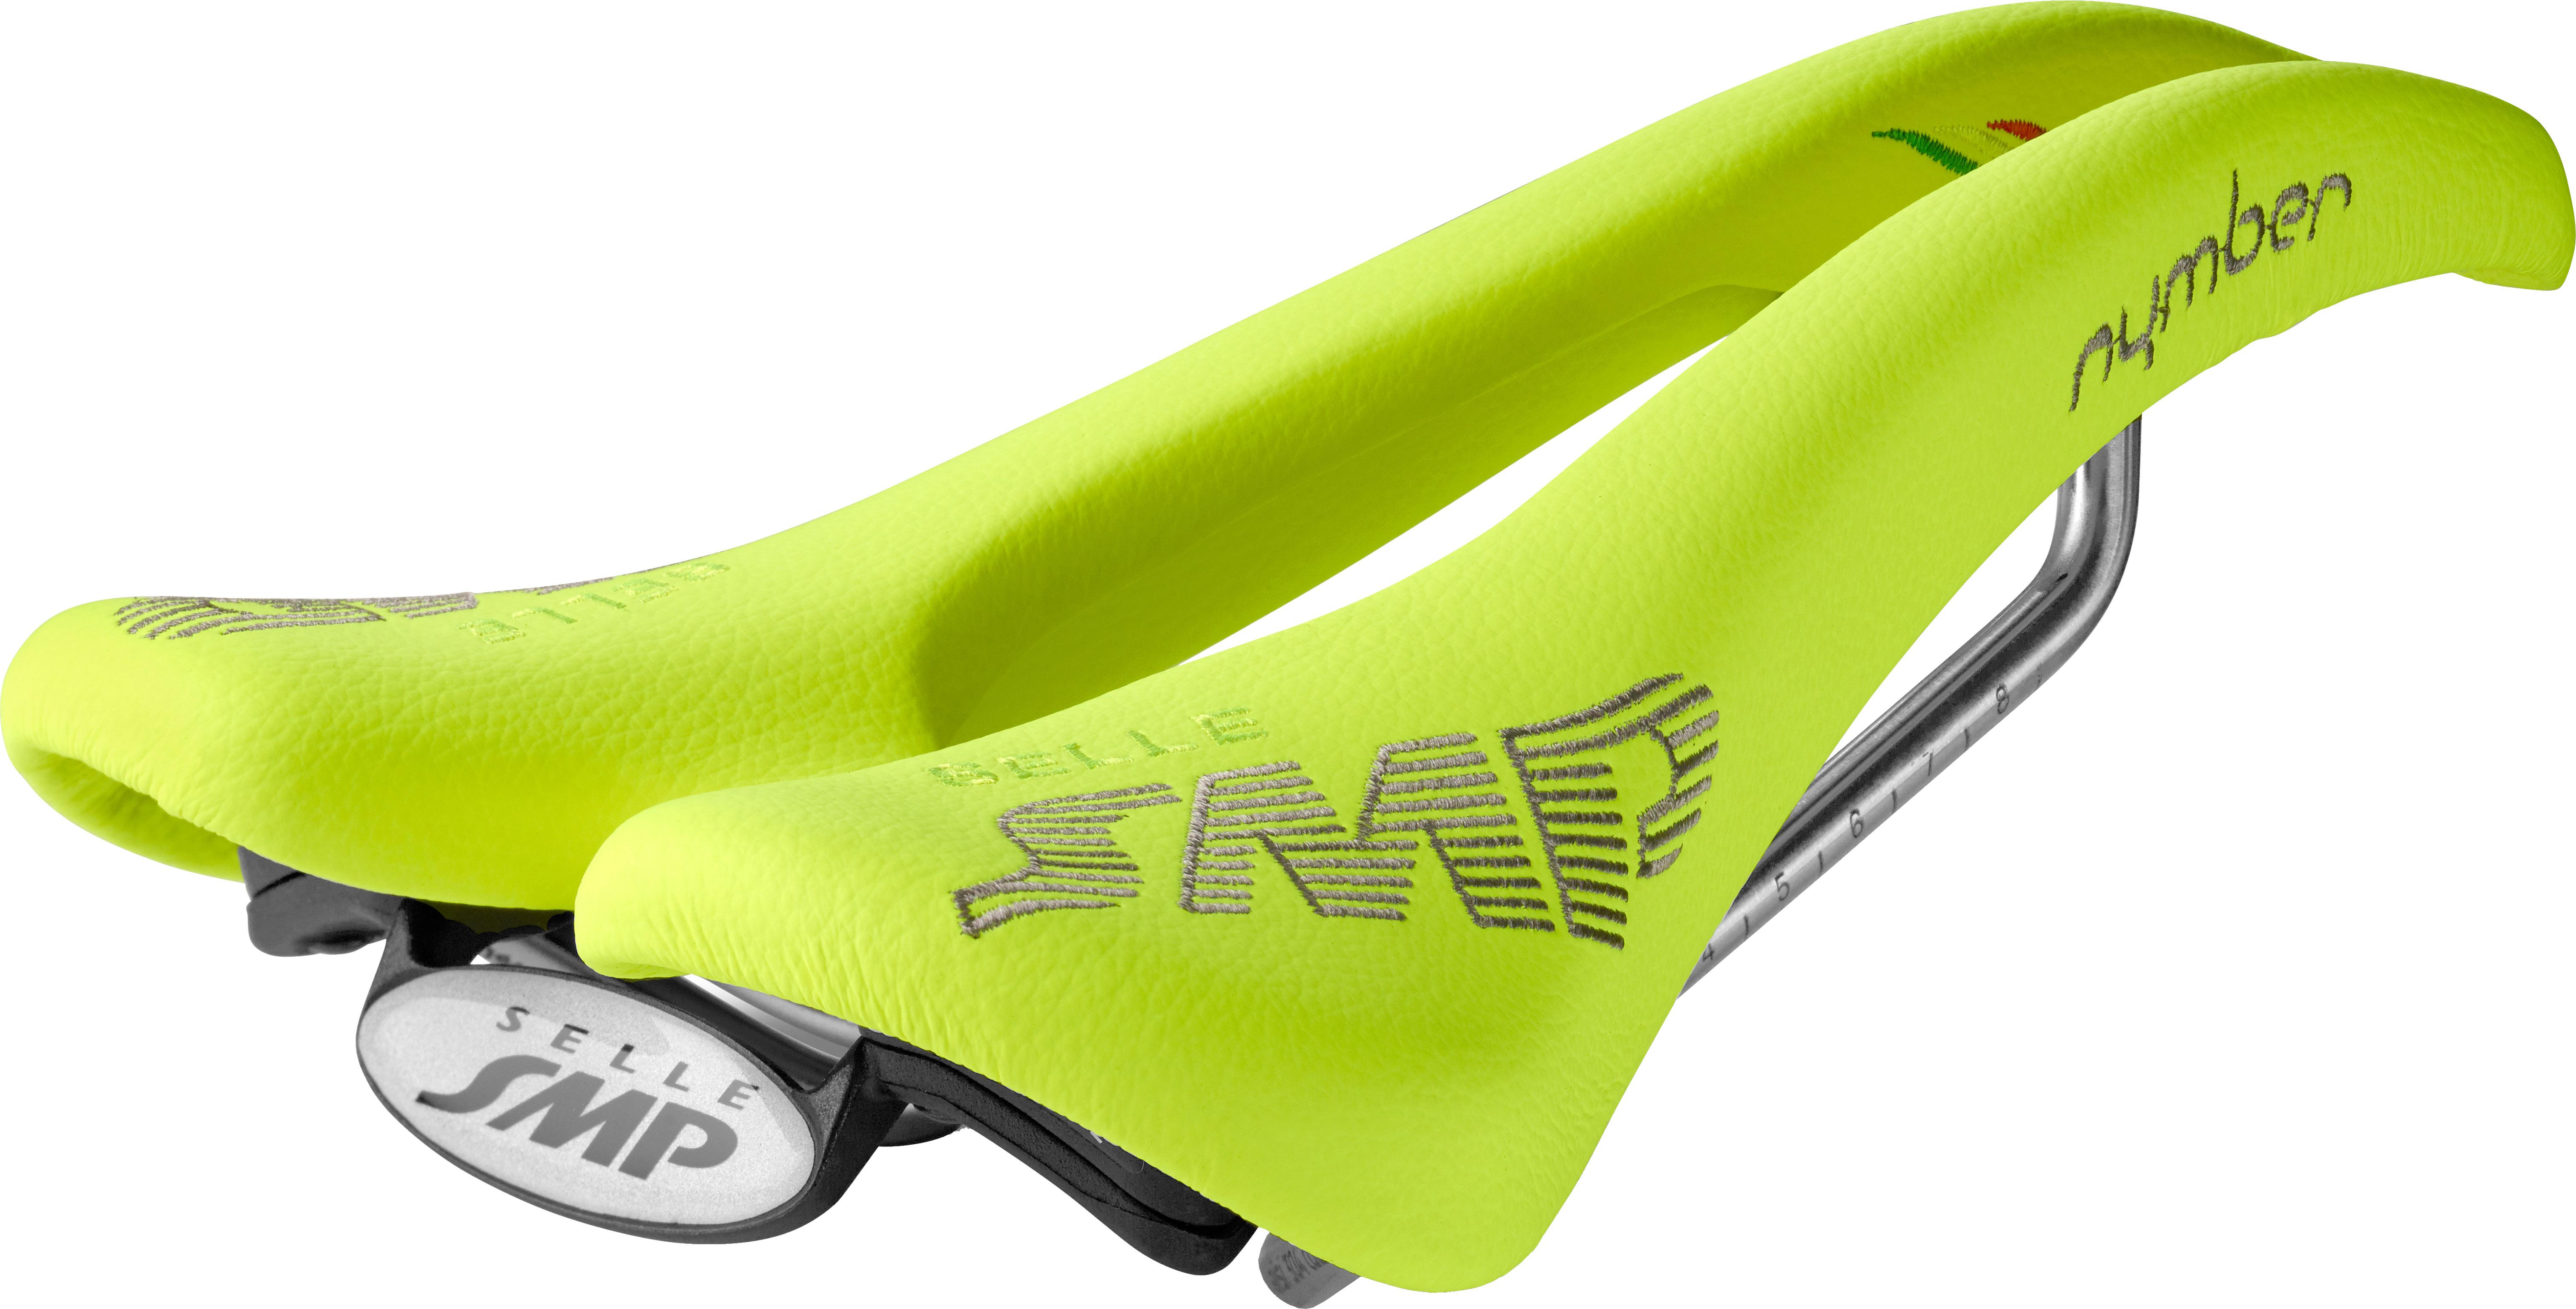 Selle Smp Nymber Saddle - Fluo Yellow